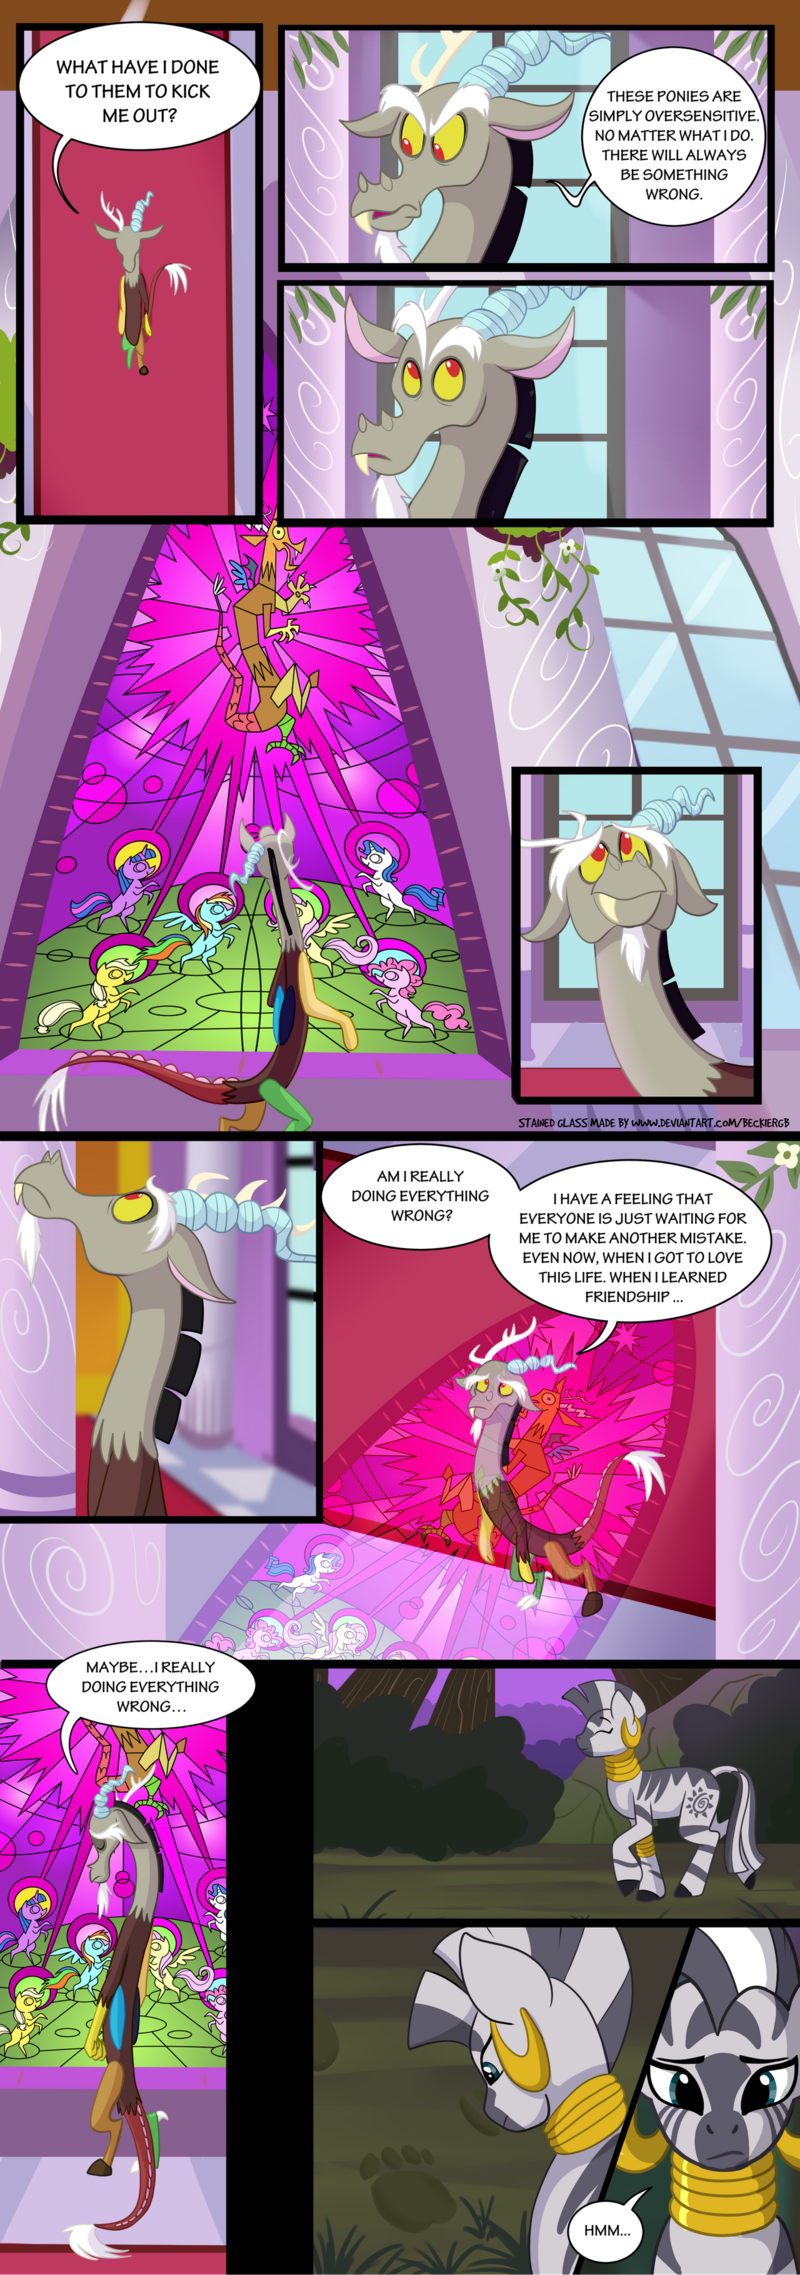 Page 22-23: Demons of the past